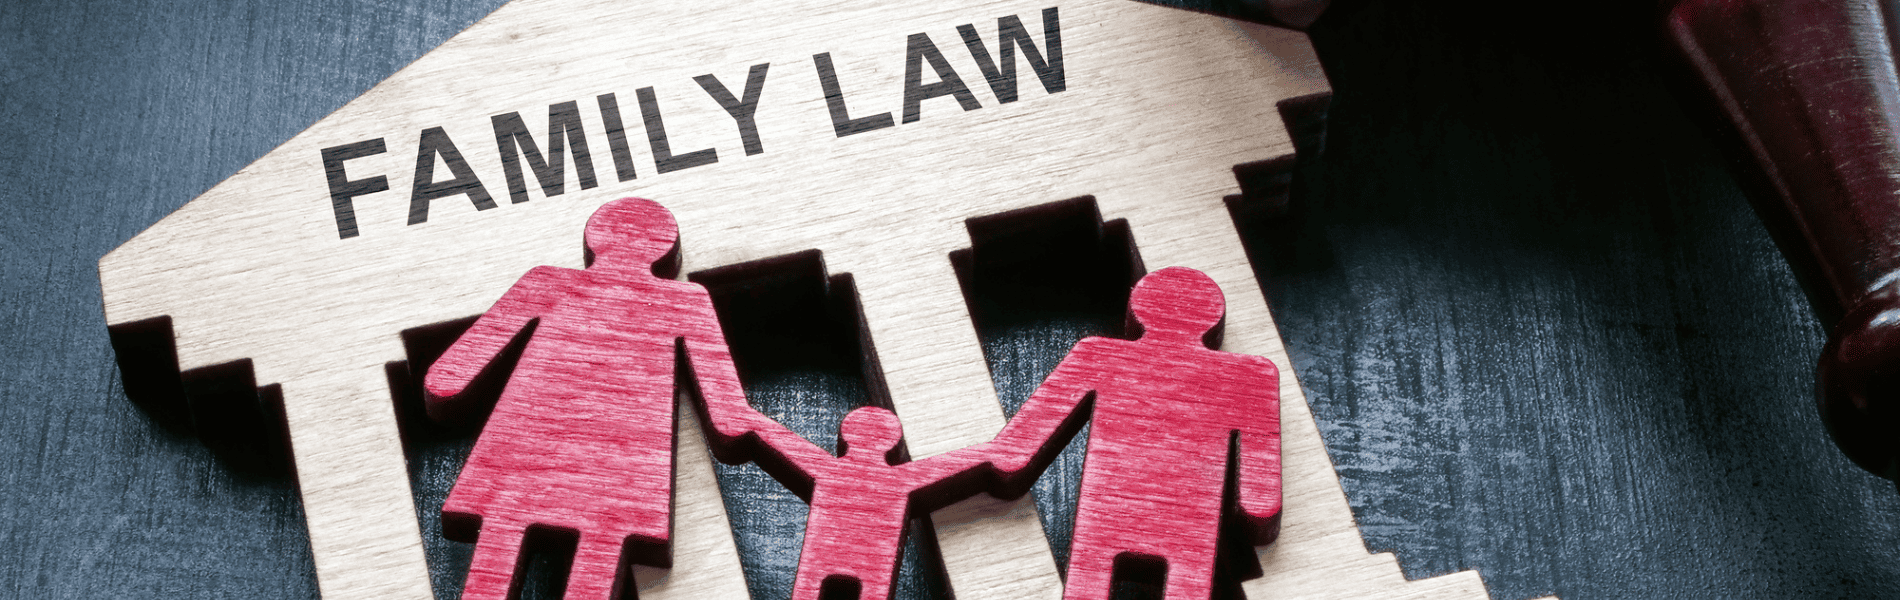 seo for family law